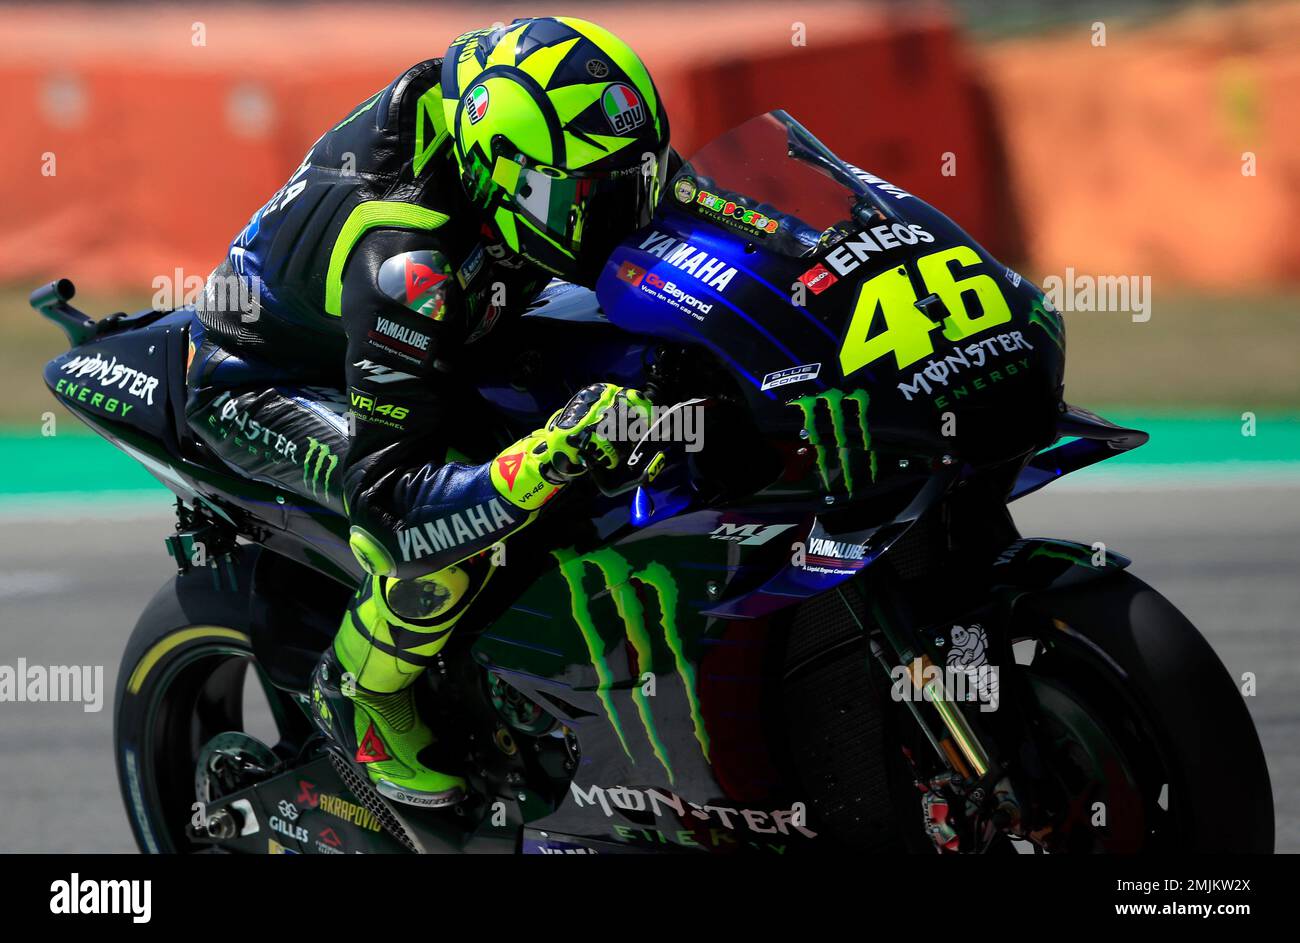 Italian rider Valentino Rossi of the Monster Energy Yamaha MotoGP steers  his motorcycle at the MotoGP race during the Dutch Grand Prix in Assen,  northern Netherlands, Sunday, June 30, 2019. (AP Photo/Peter